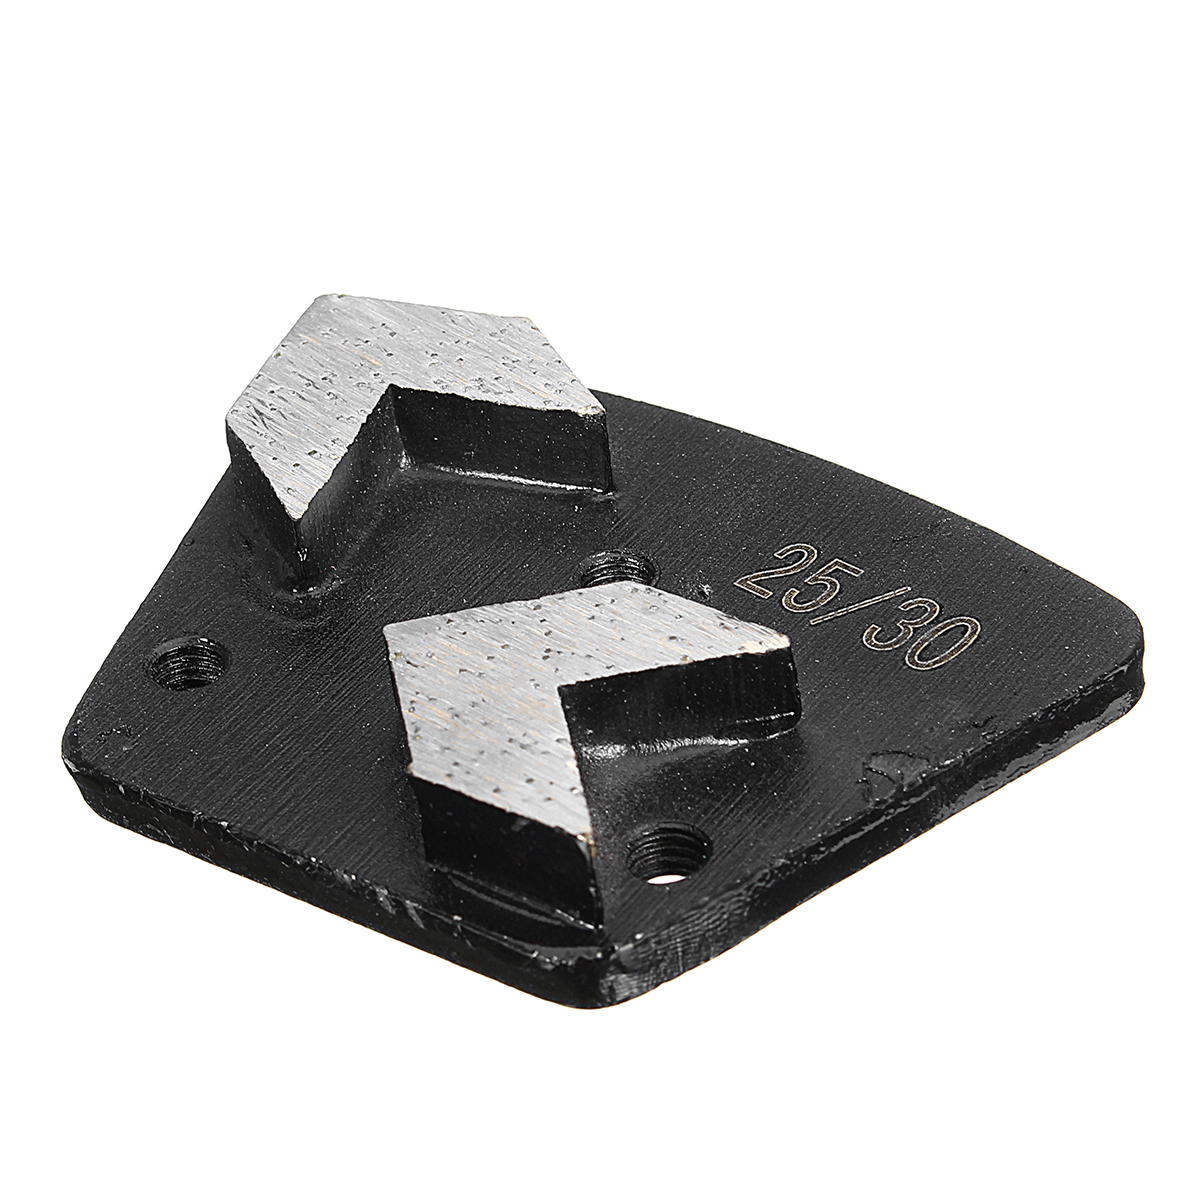 2530-Grit-Medium-Bond-Plate-Trapezoid-Grinding-Disc-for-Bolt-On-Grinders-1349216-3